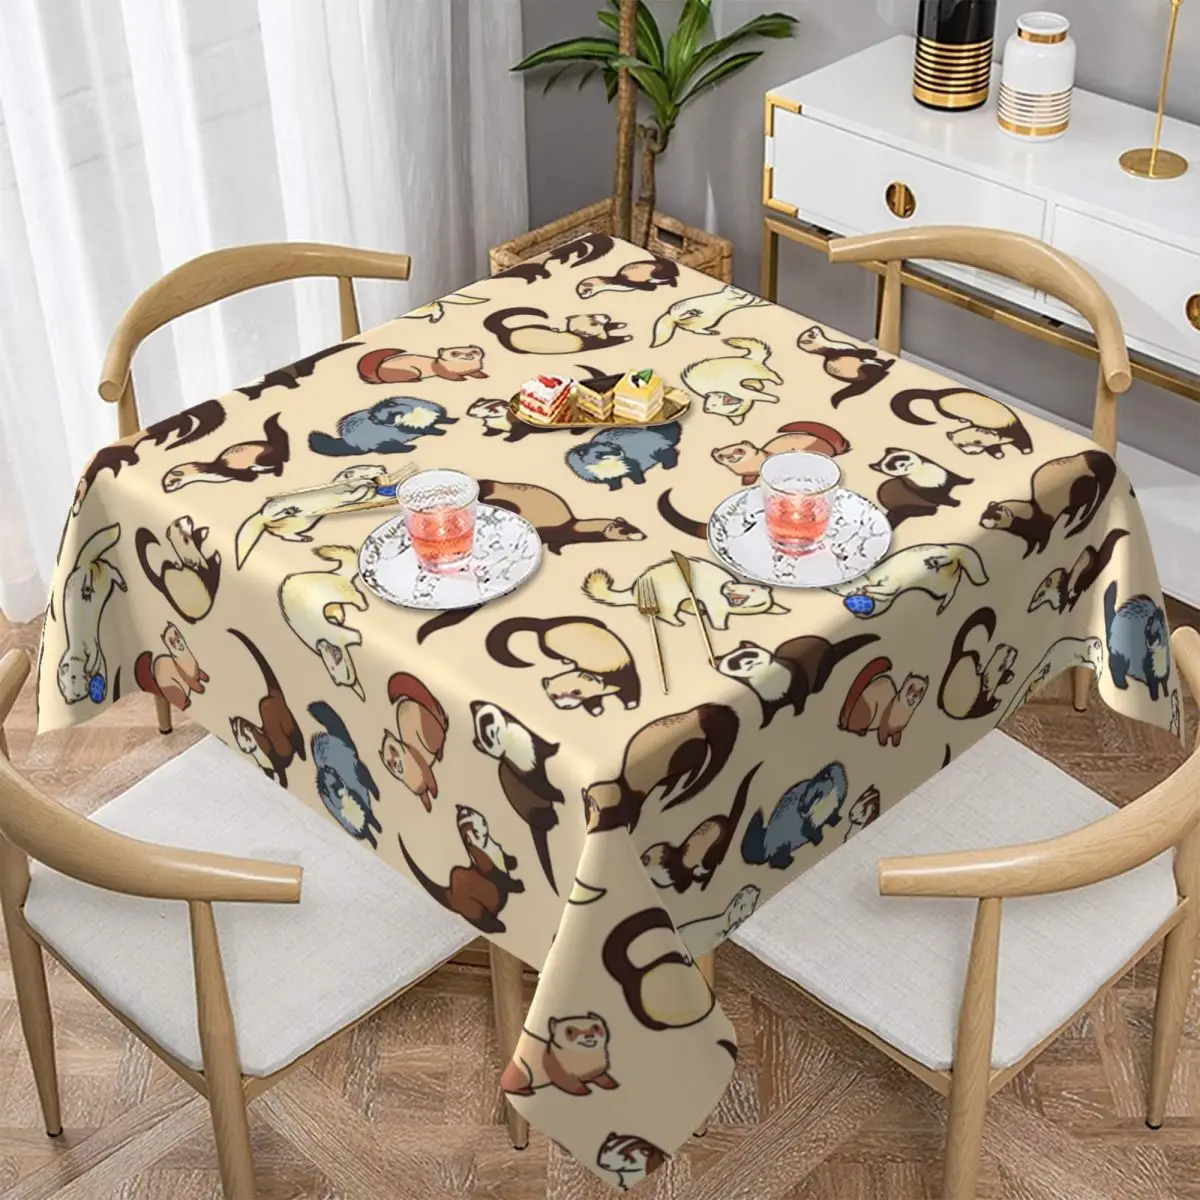 

Adorable Ferret Pattern Table Cover Universal Rectangular Fitted Tablecloth Protector for Wedding Banquet Party